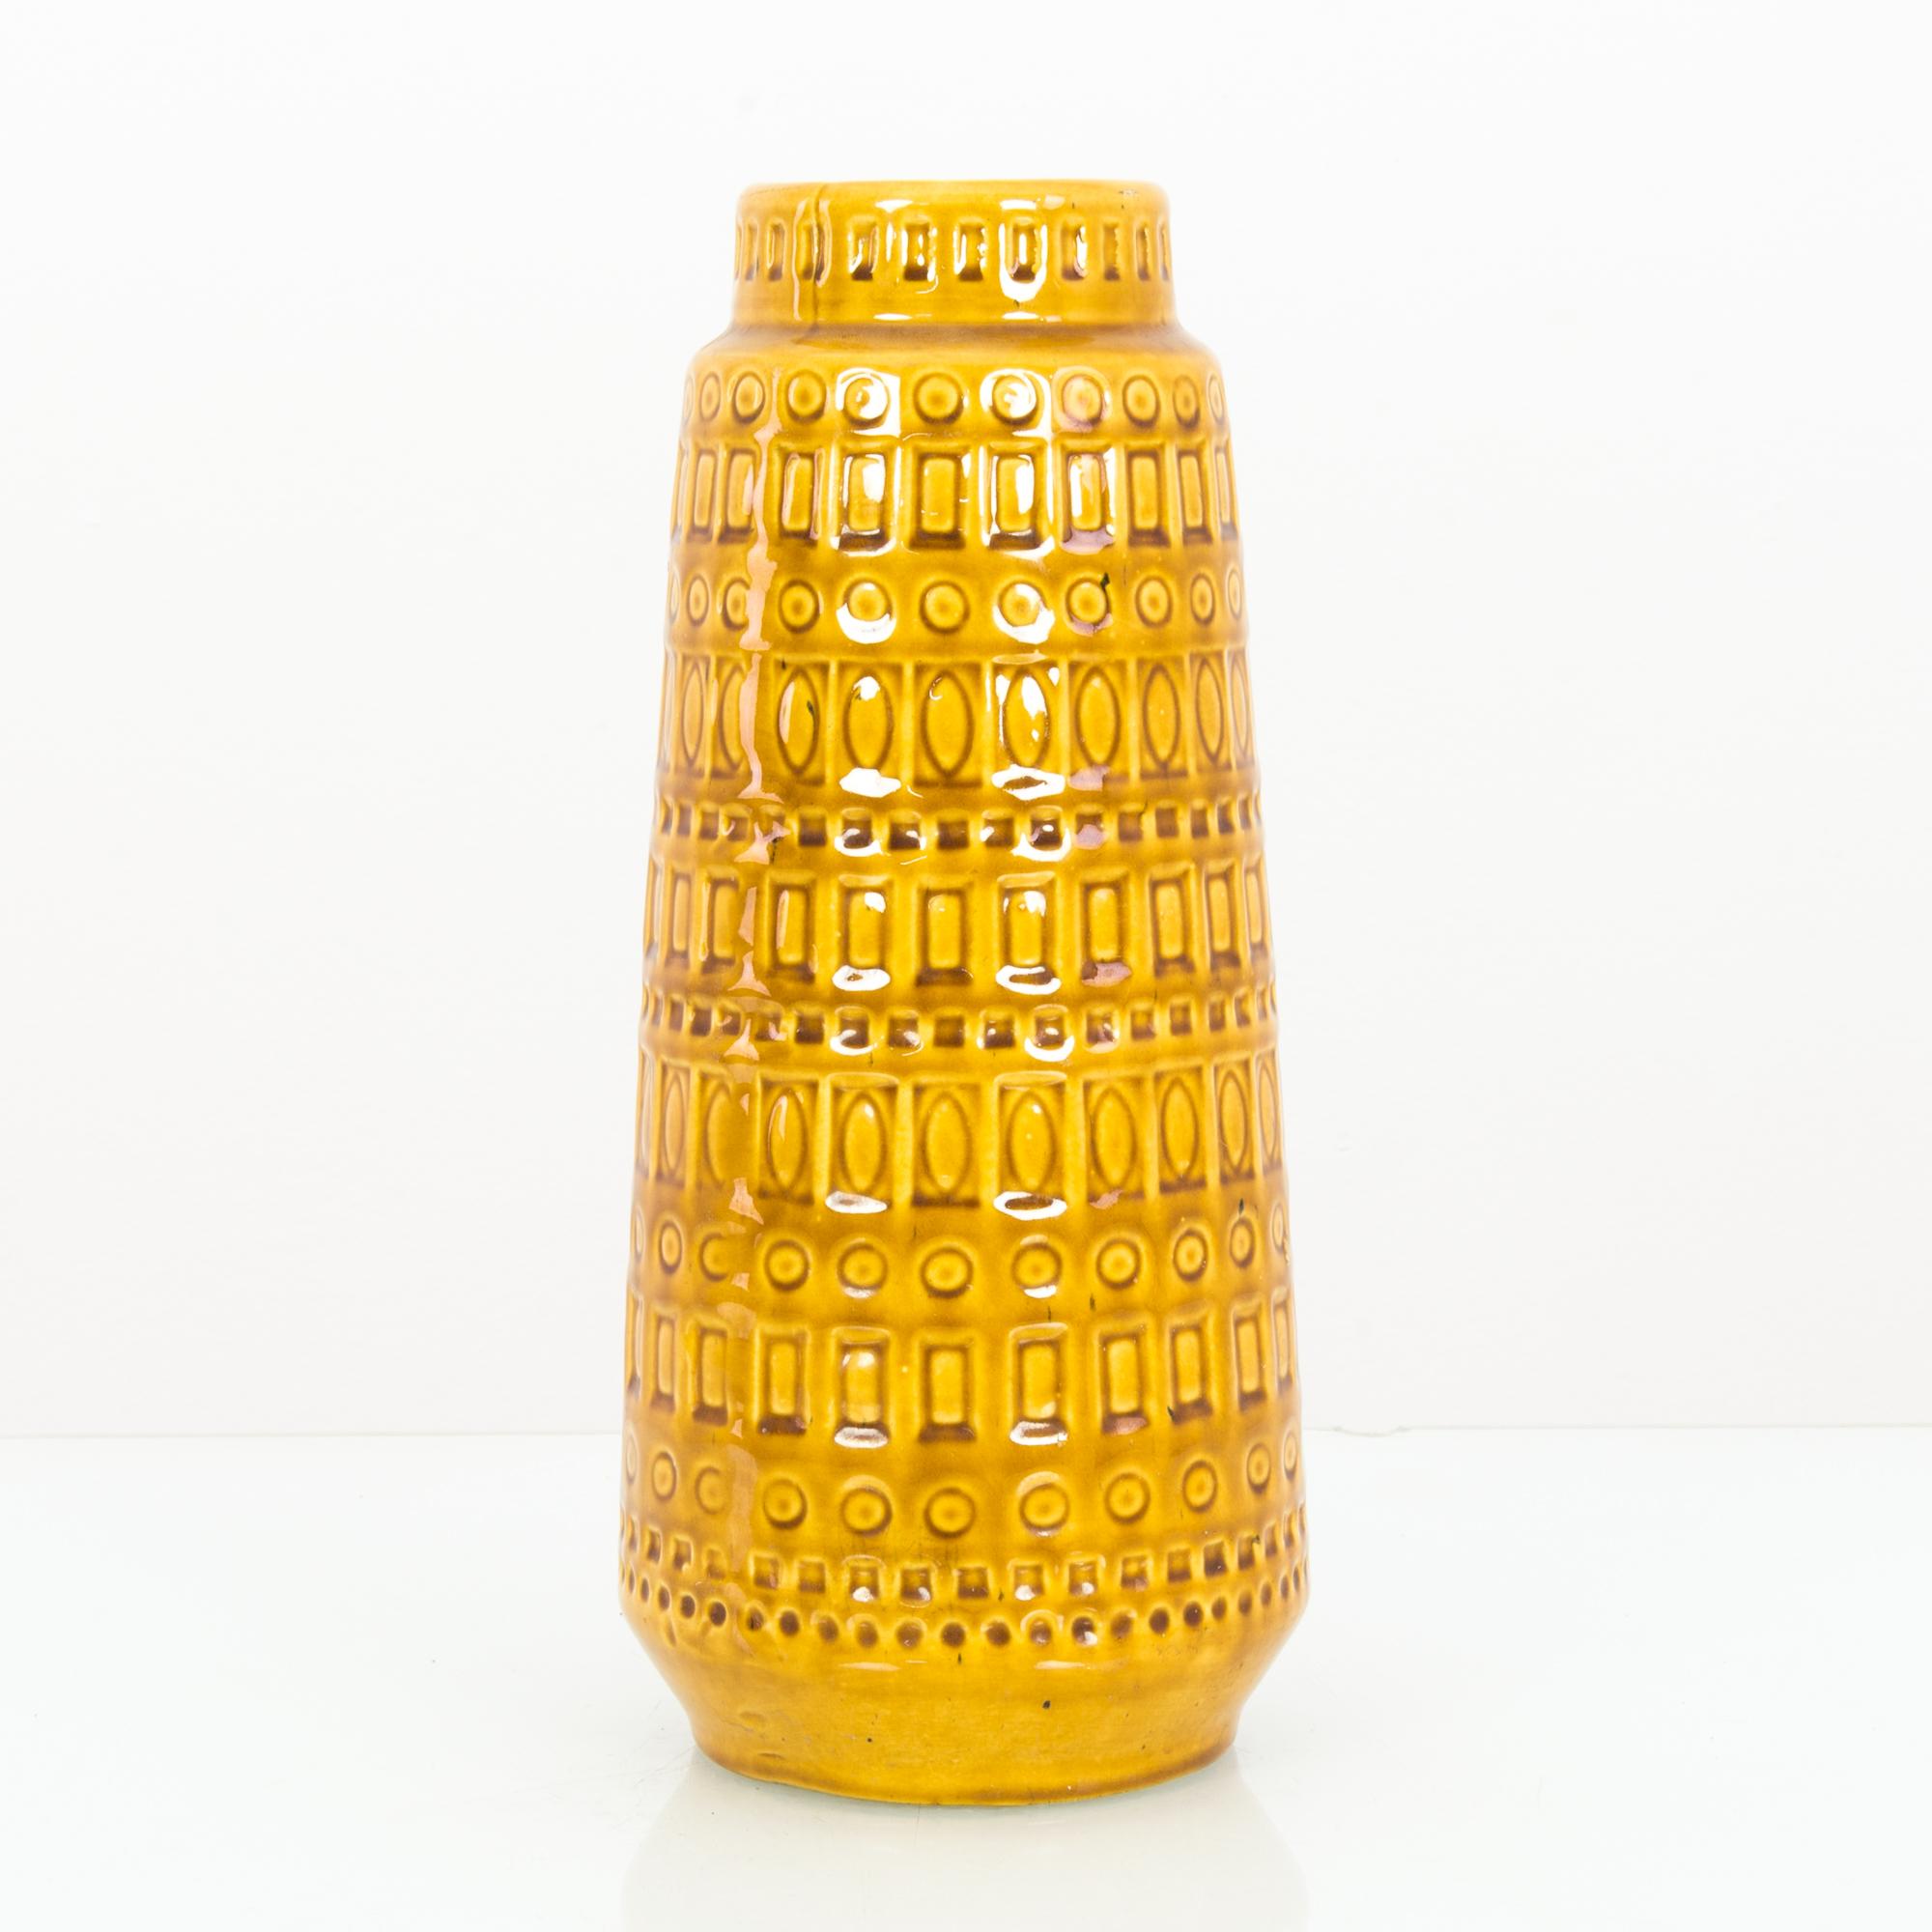 A ceramic vase from West Germany, circa 1960. A tall, tapering form, decorated with geometric impressions. The glaze is a goldenrod color, bright yet earthy, with a cheerful gleam. The shape is reminiscent of a circular tower of babel, girded with